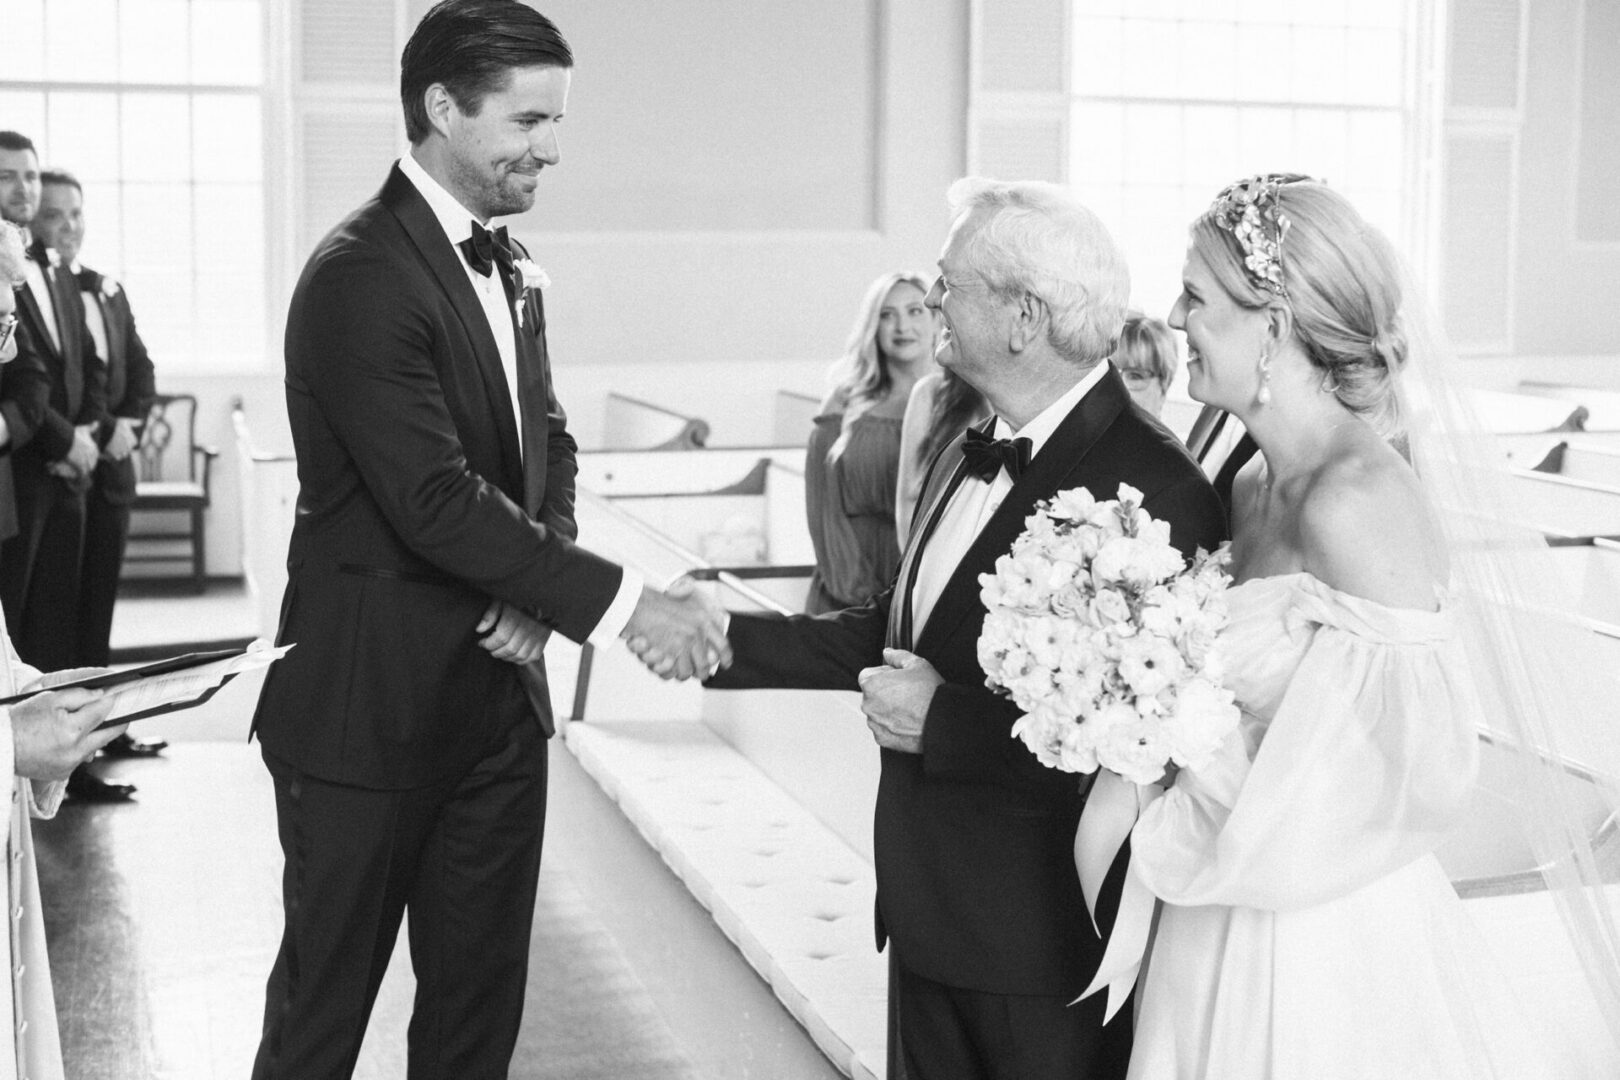 The groom is formally welcomed by the father of the bride